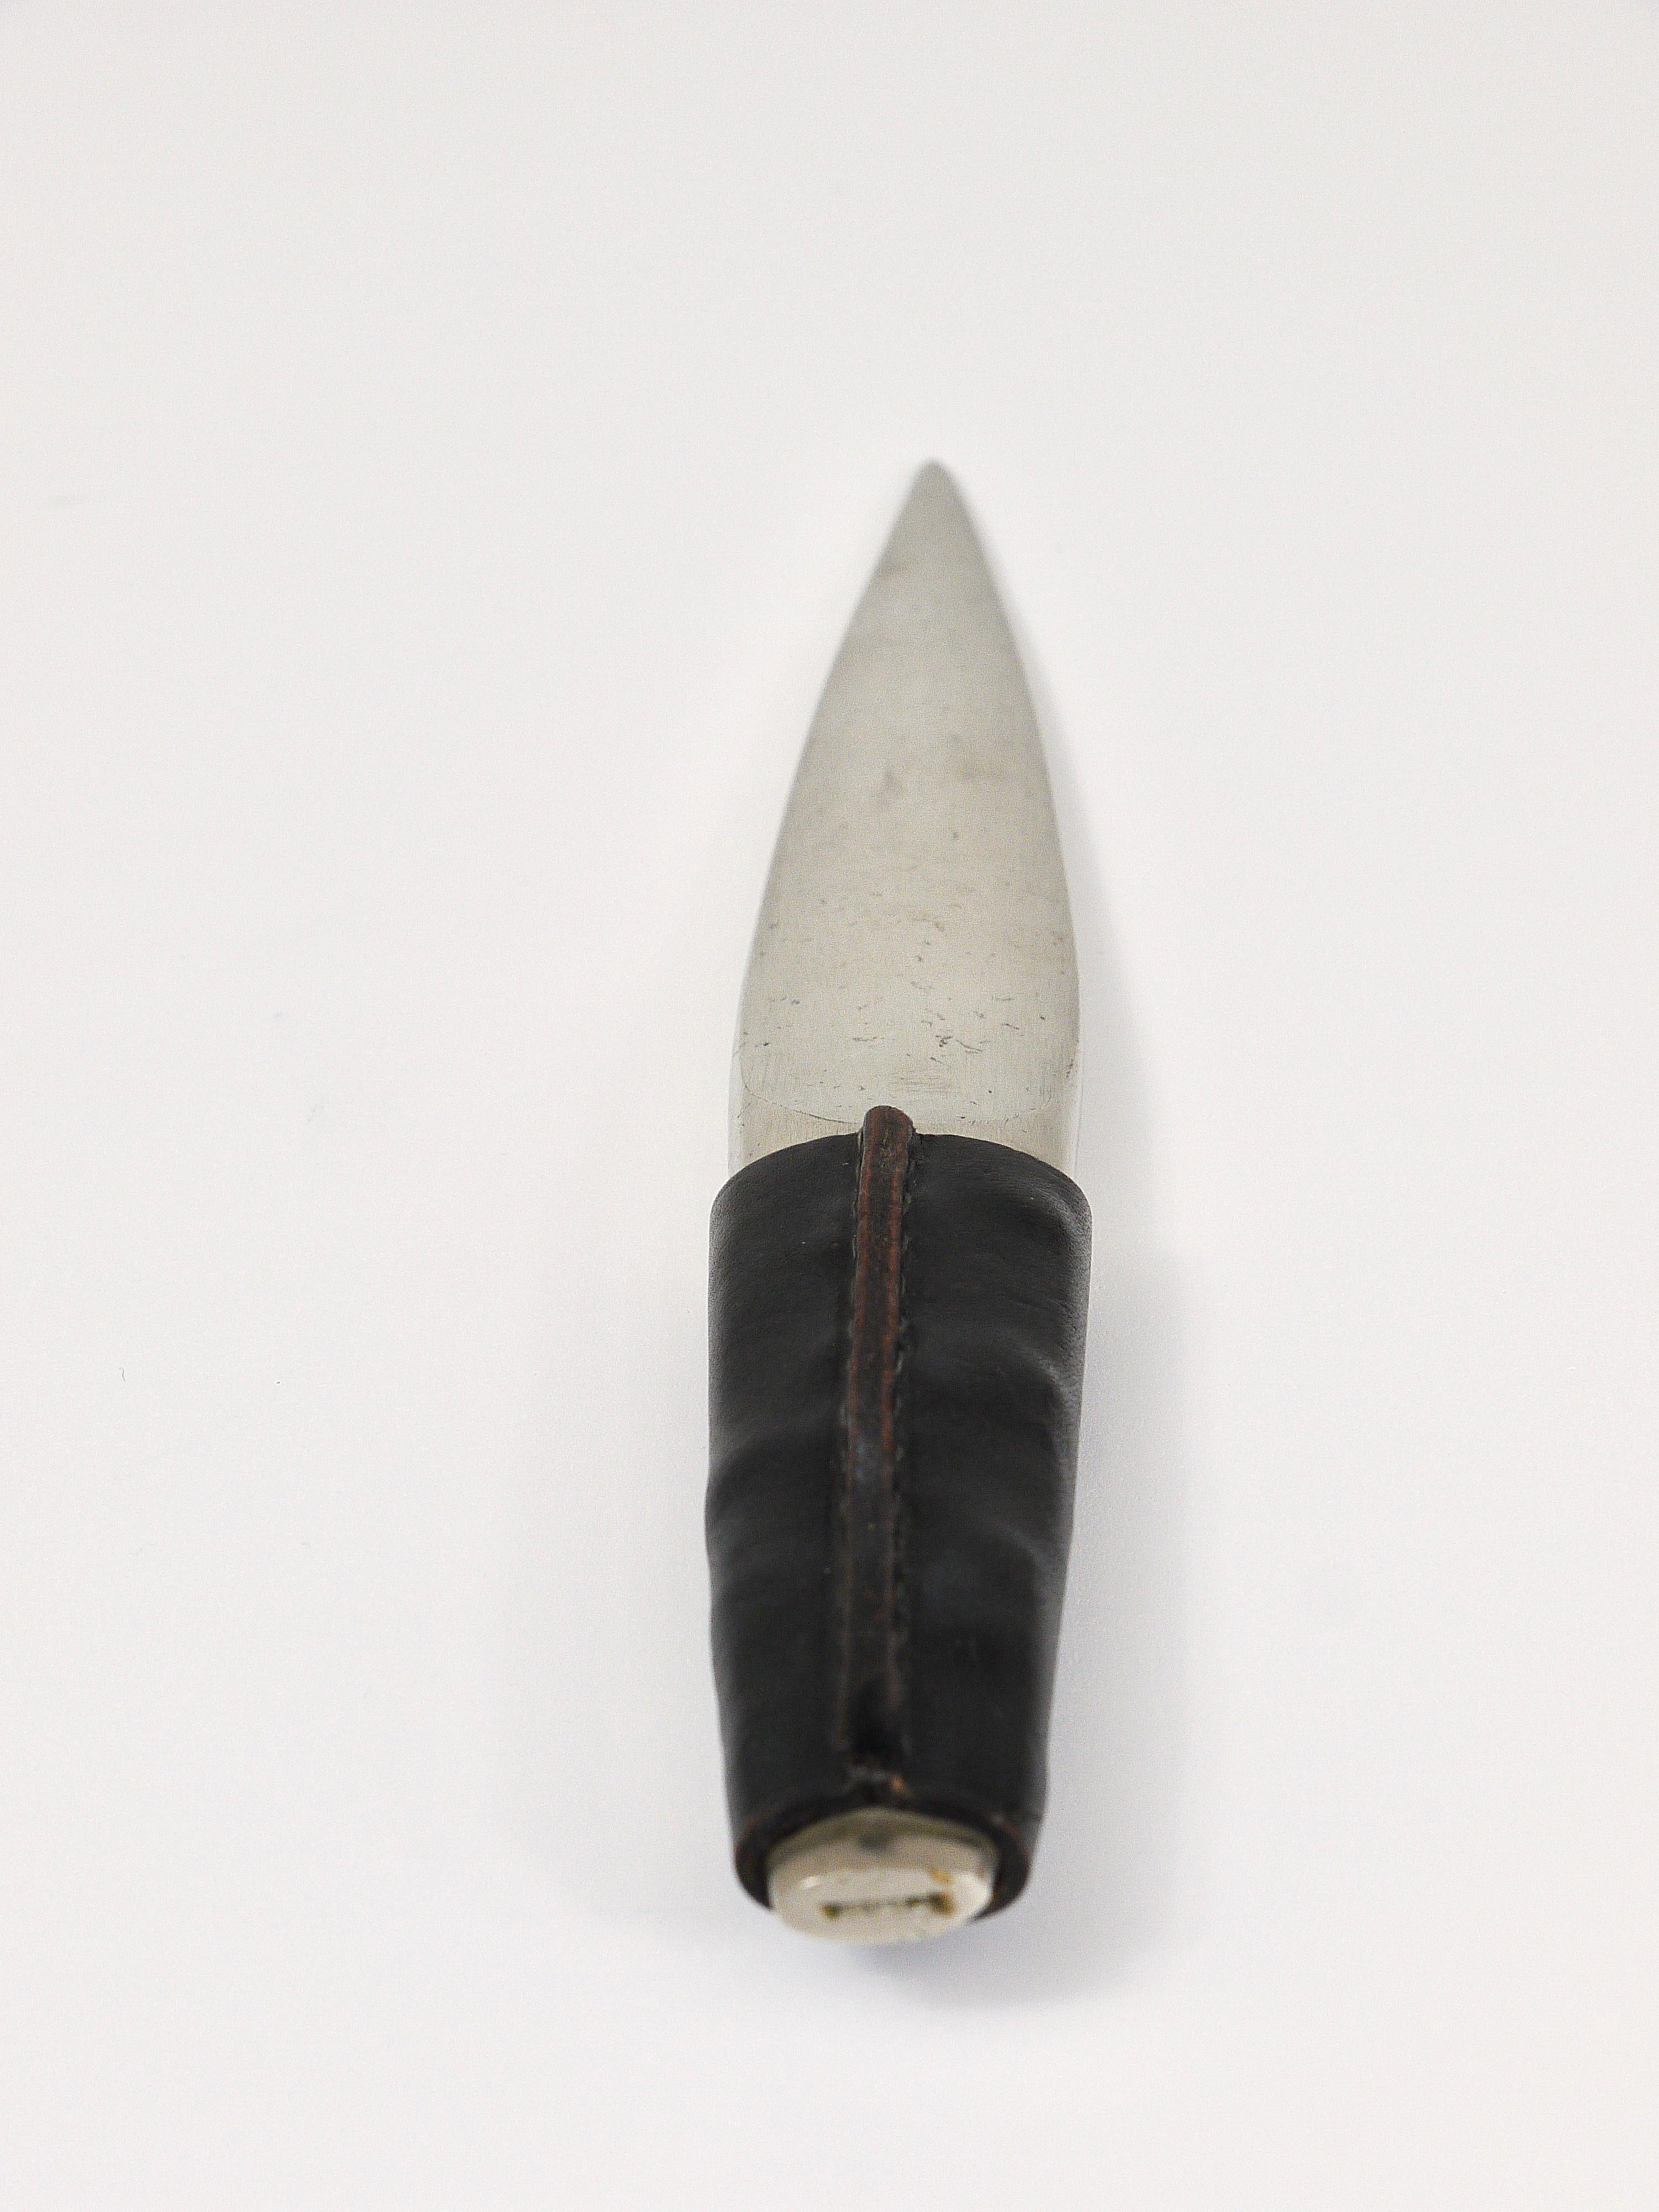 Mid-Century Modern Carl Auböck Nickel-Plated Brass Leather Letter Opener, Paper Knife, 1950s